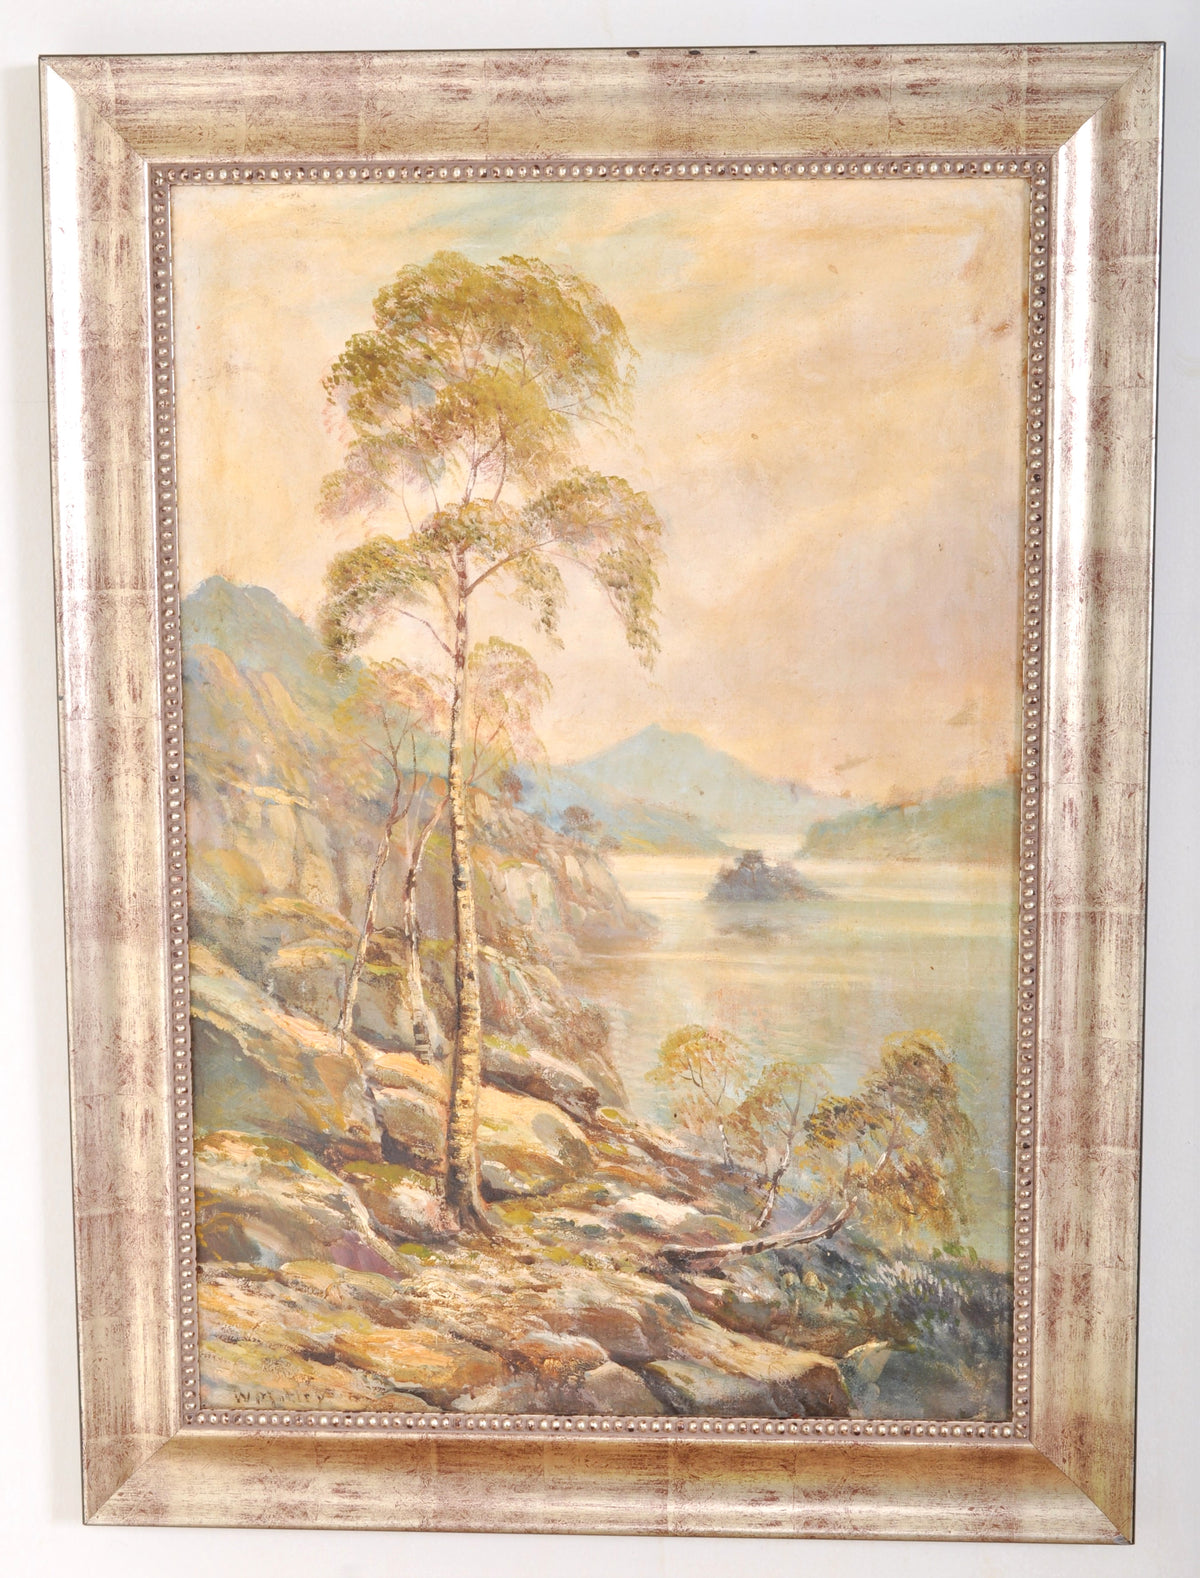 Antique Landscape Oil on Canvas Painting by Wilton Motley (British, 1800-1900), Circa 1870